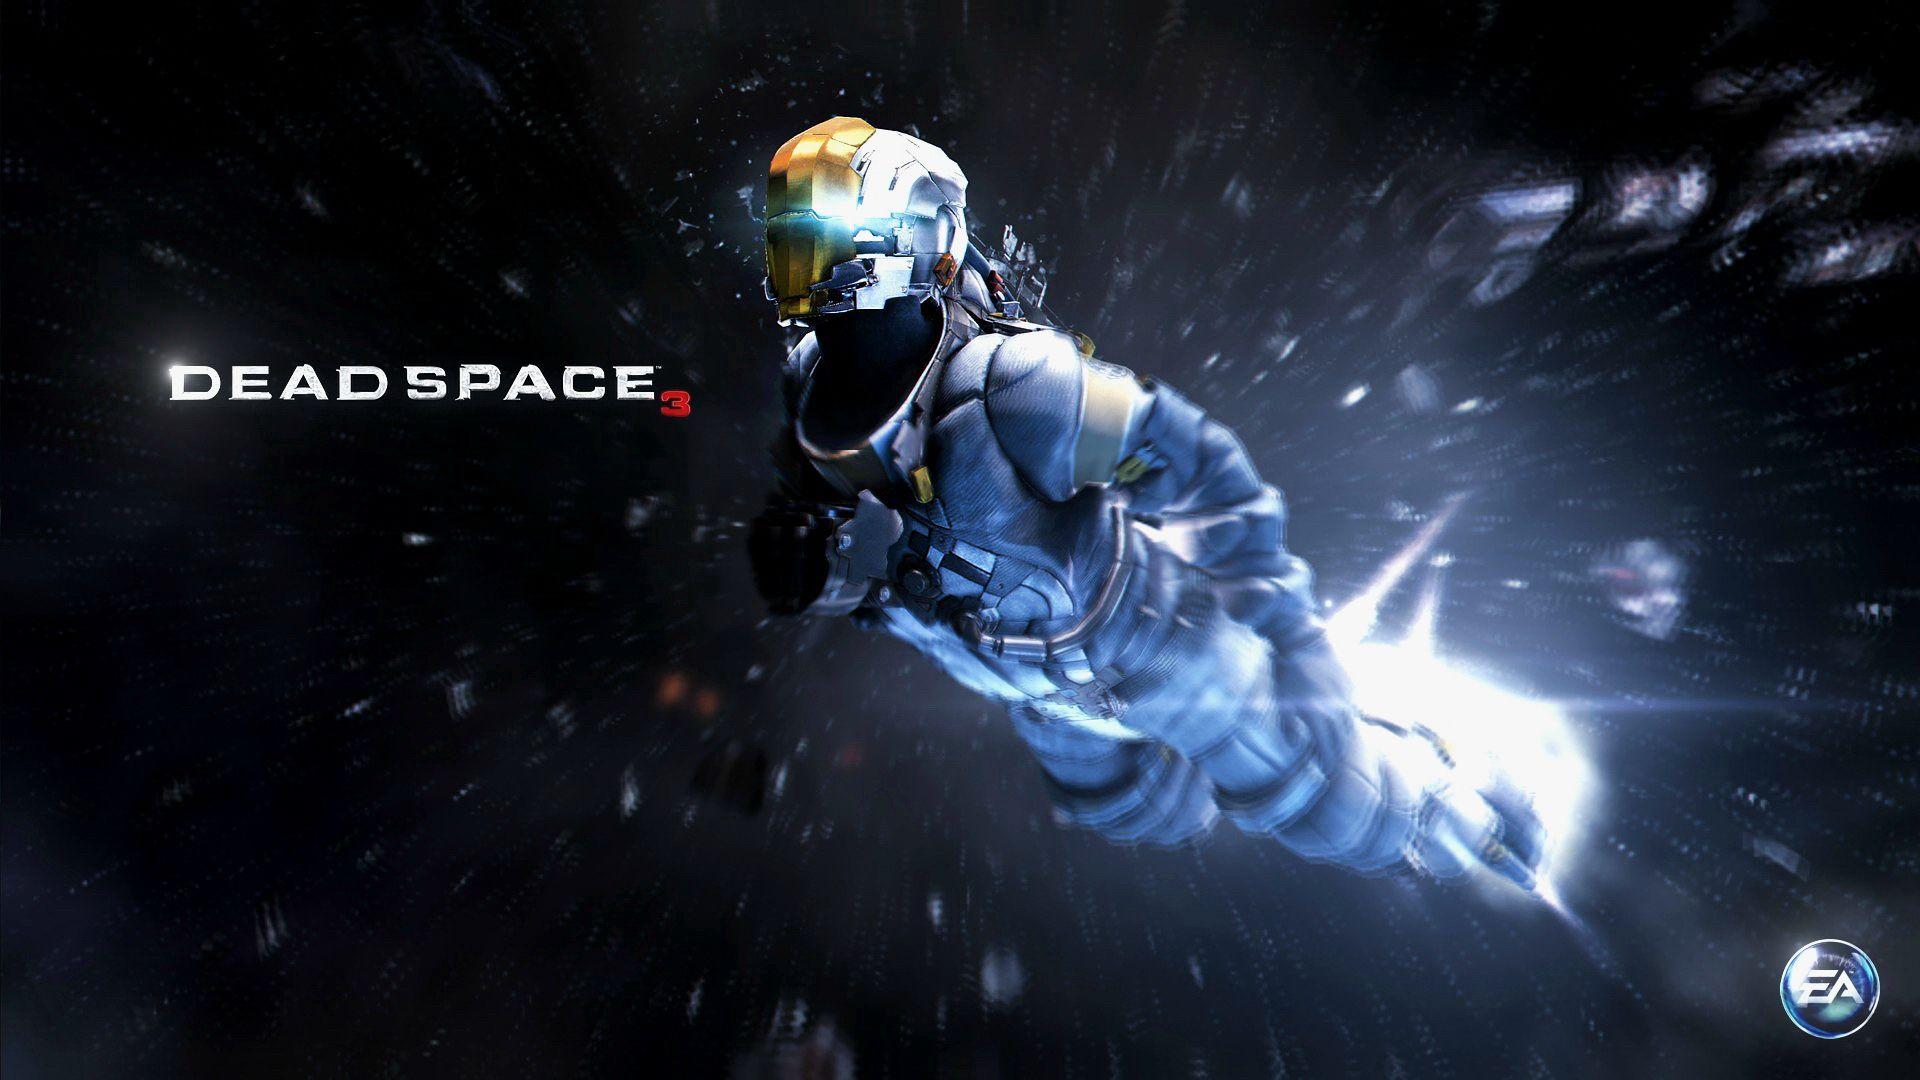 Dead Space HD Wallpapers - Top Free Dead Space HD Backgrounds ...